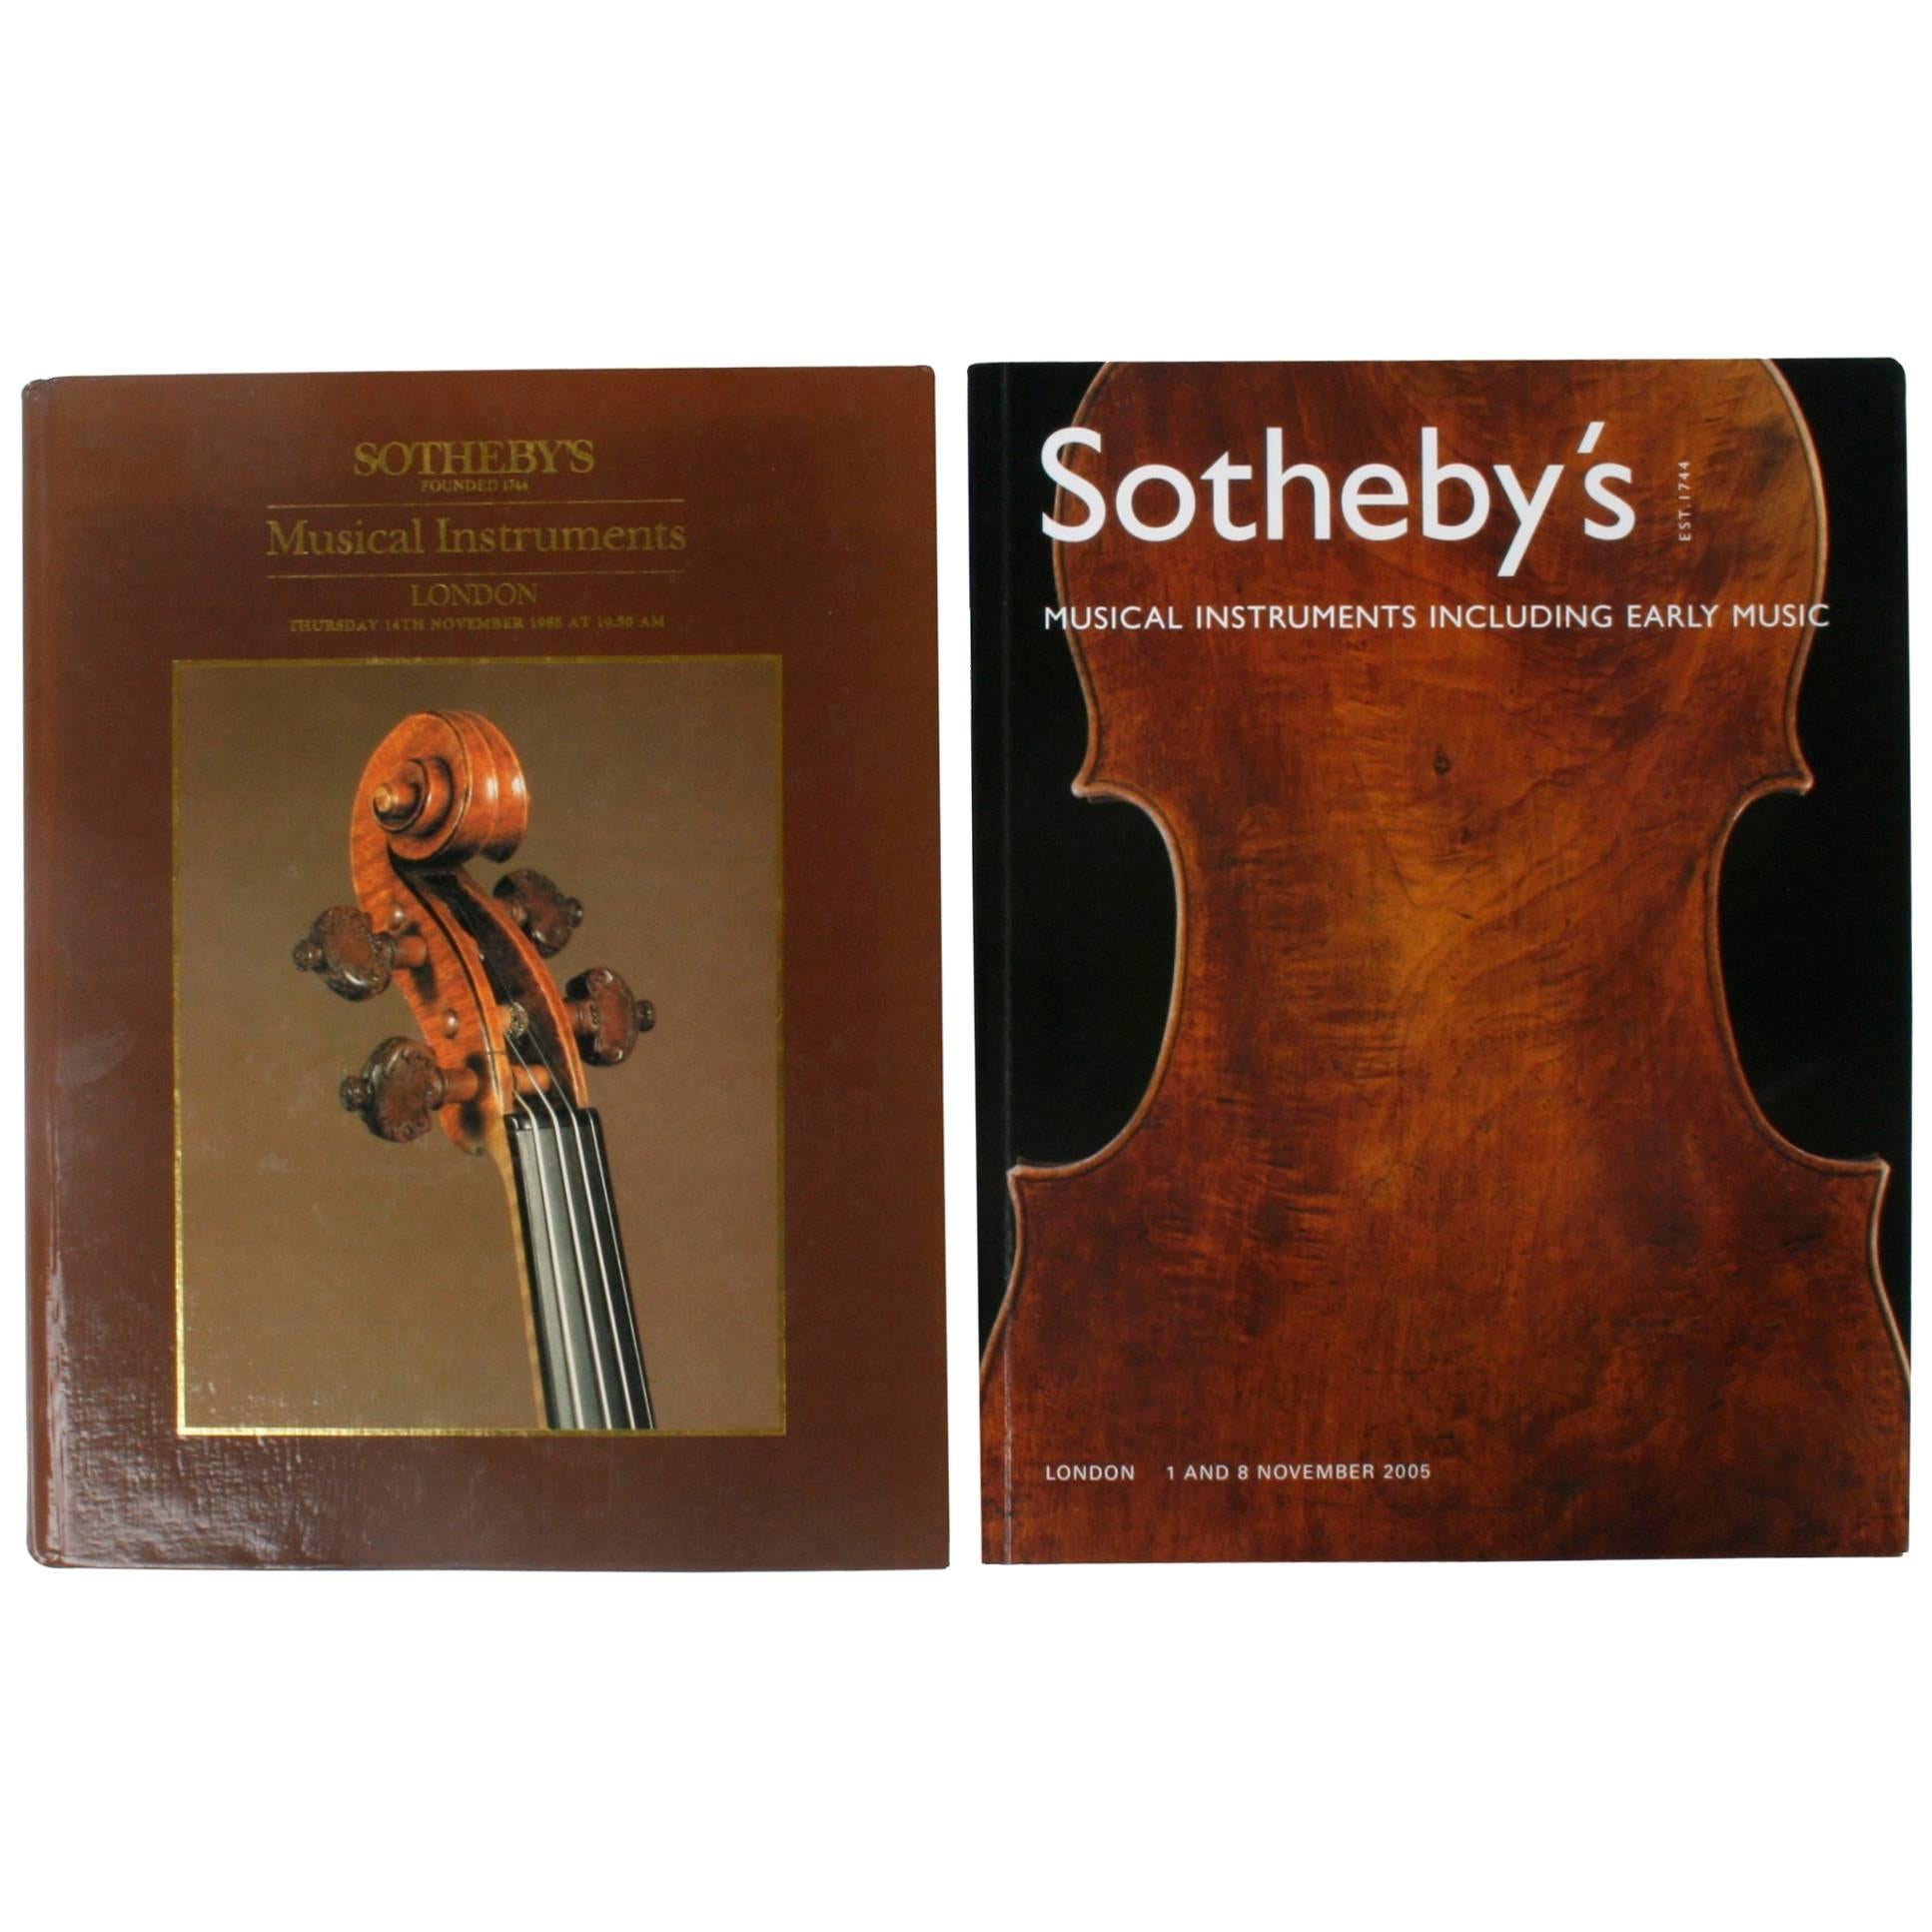 Two Sotheby's London Auction Catalogues on Musical Instruments